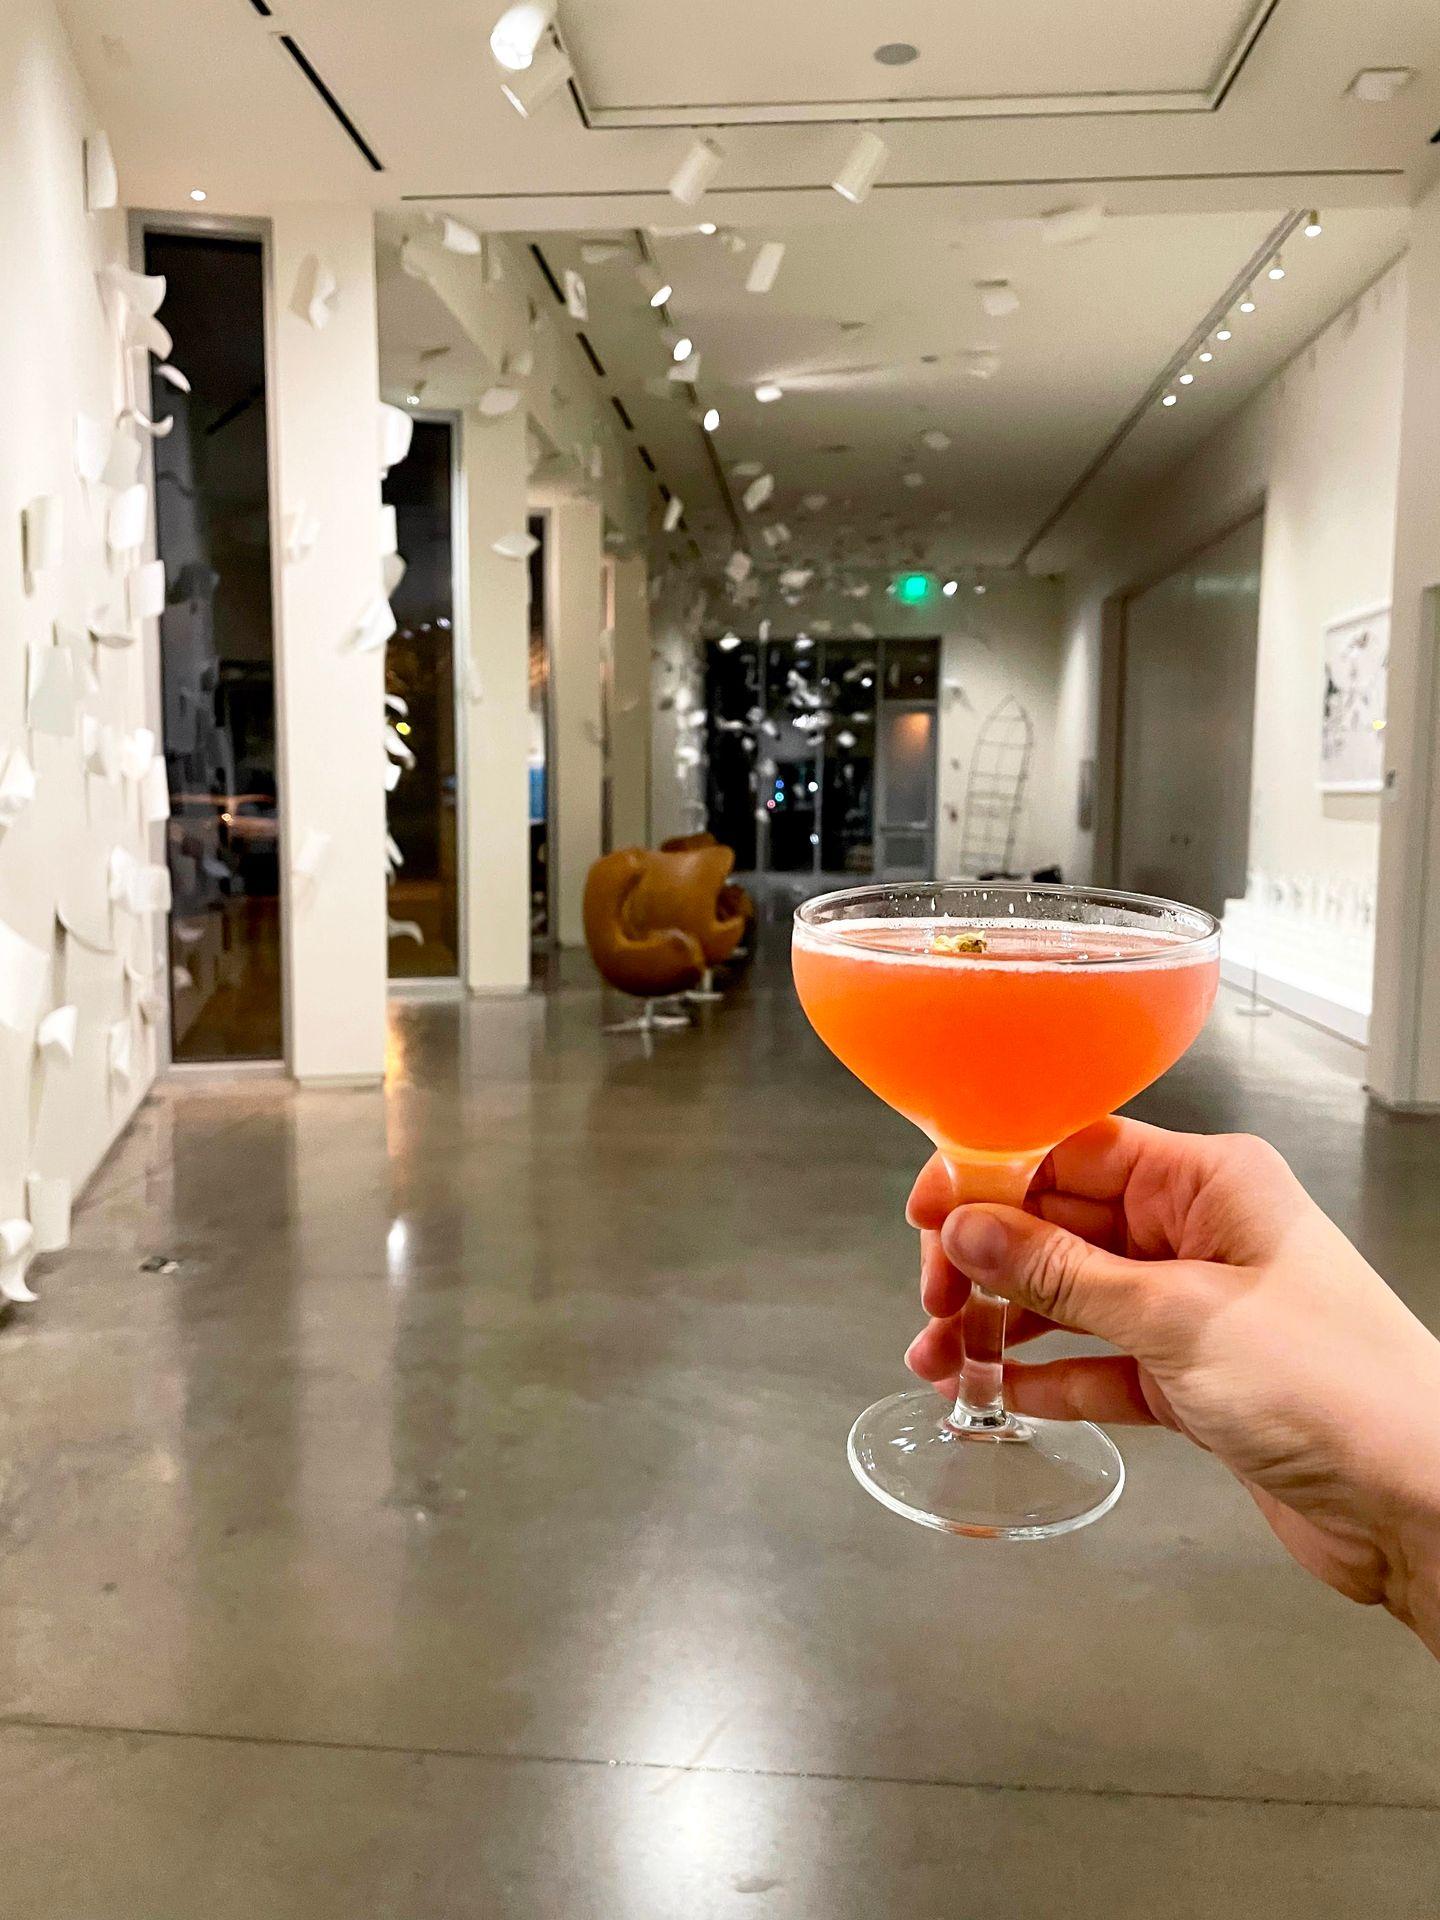 Holding up an orange cocktail with an art gallery in the background.